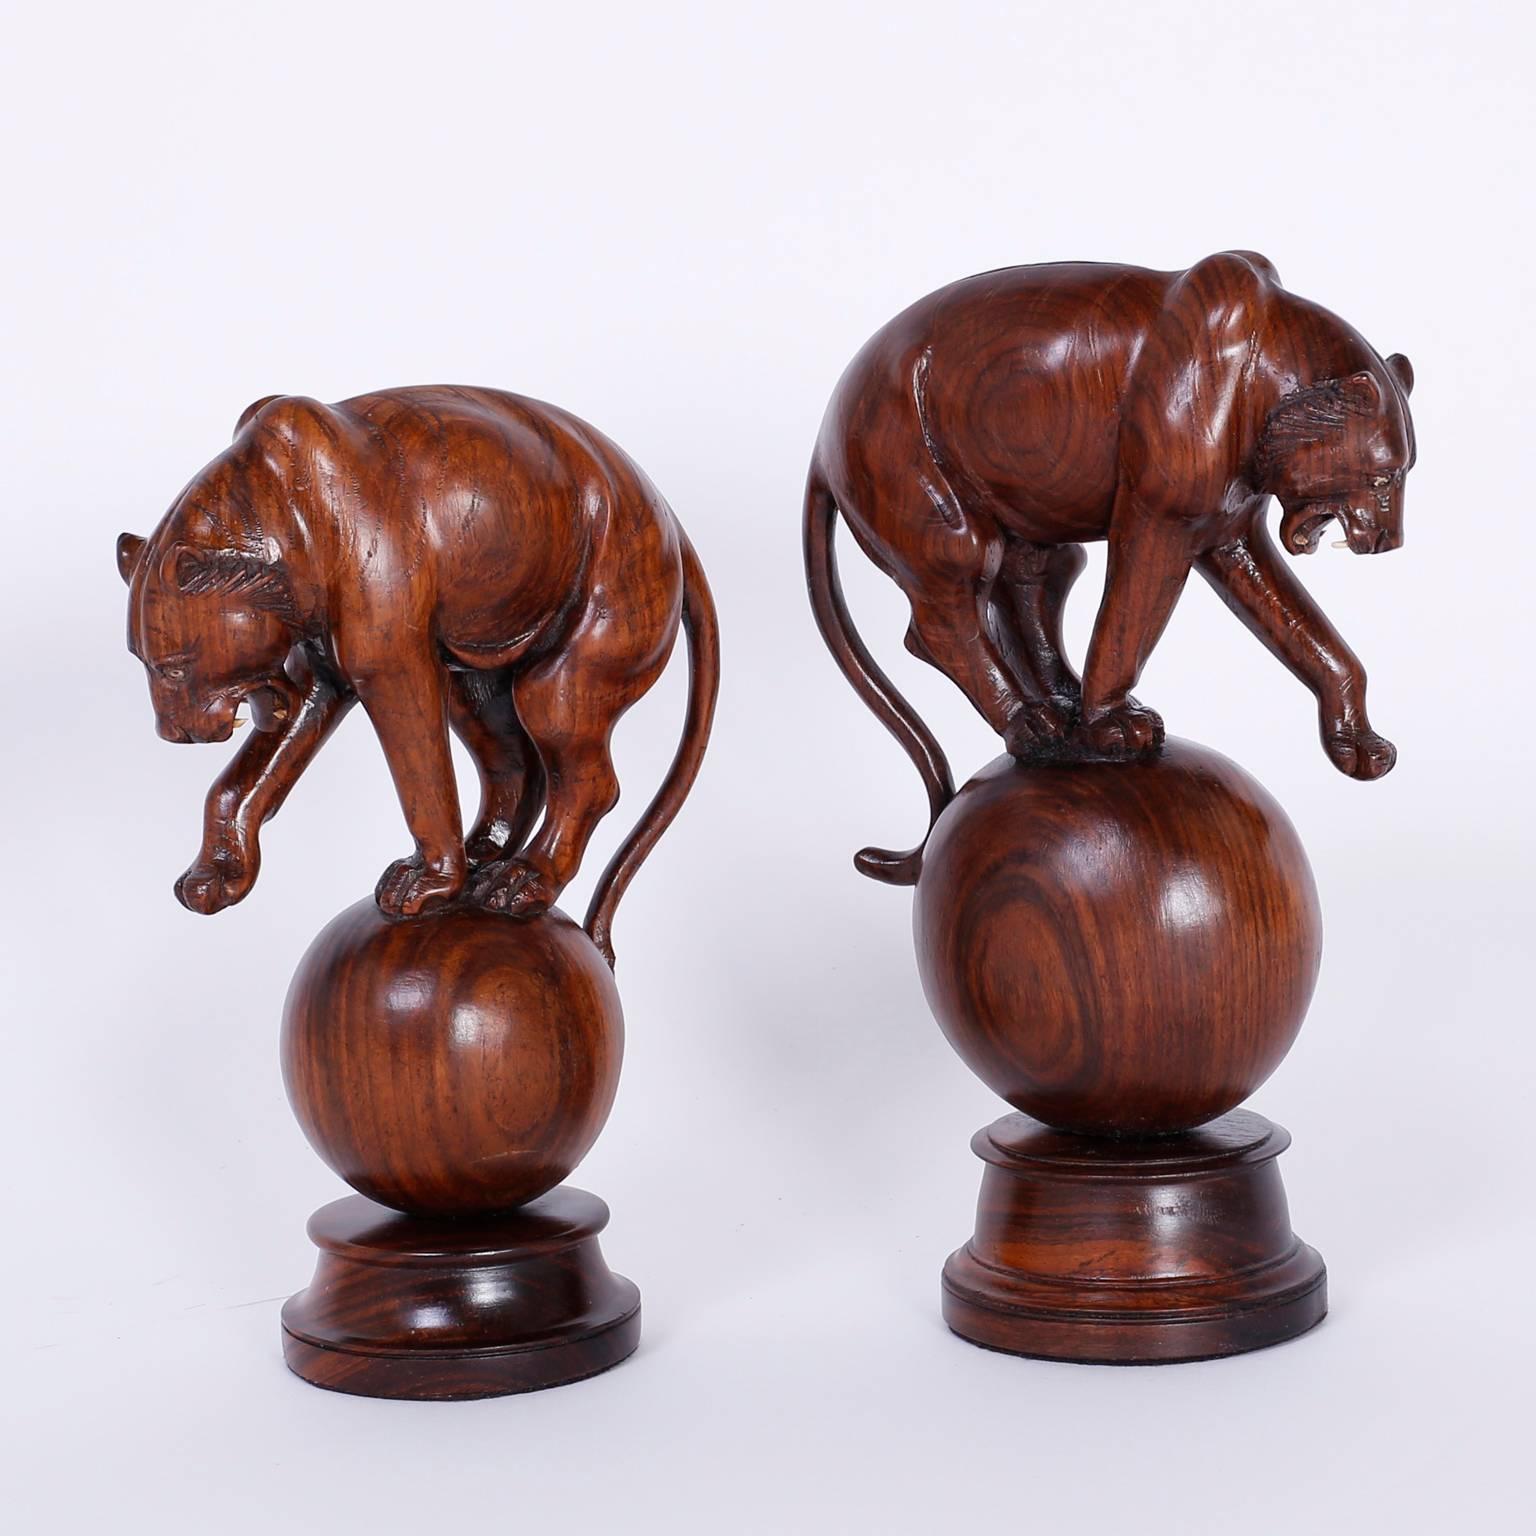 Here are two sculptures or object de art that tantilize our fascination with big cats. Expertly carved with care and know how from mahogany, these tigers seem frozen in time as they performed in a circus or side show long ago.

Measures: H 9.5, W